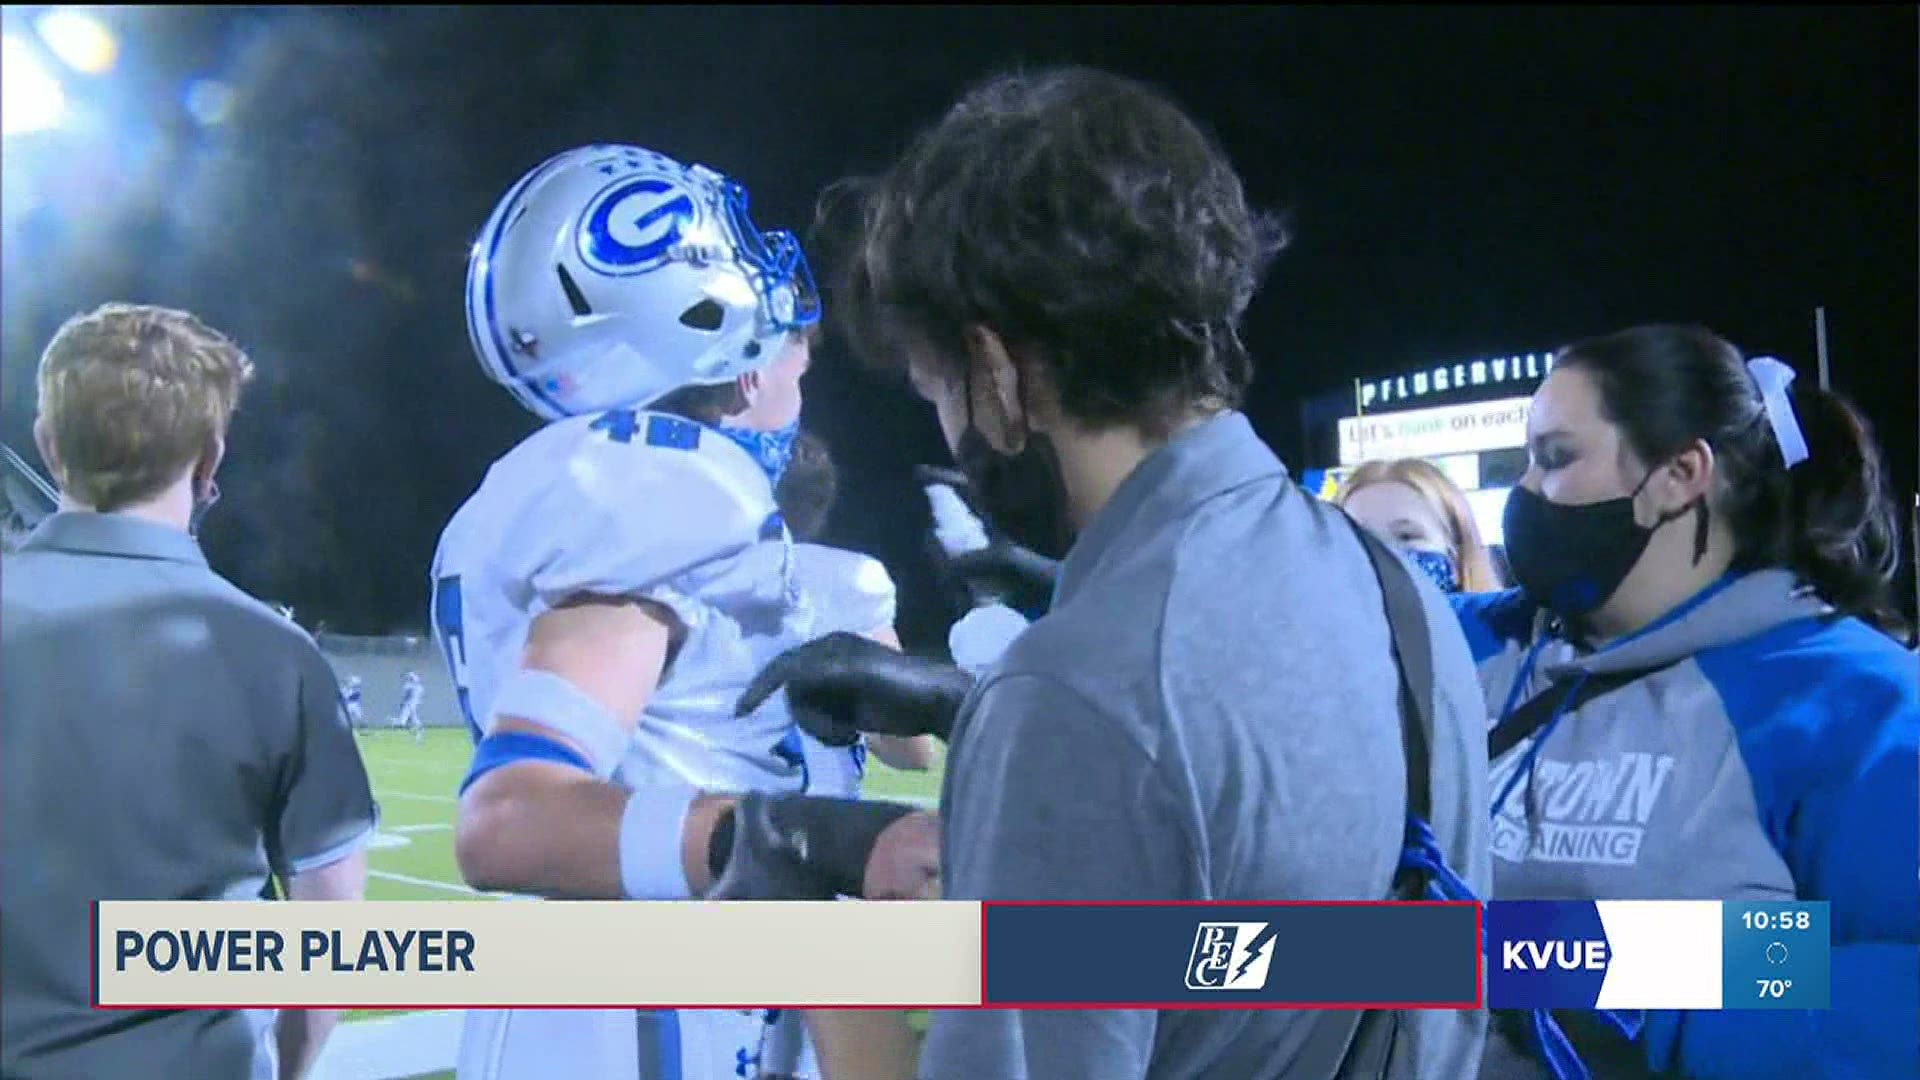 KVUE's Power Player of the Week is Georgetown athletic trainer Joseph Ma-Dean. Join us for Friday Football Fever.